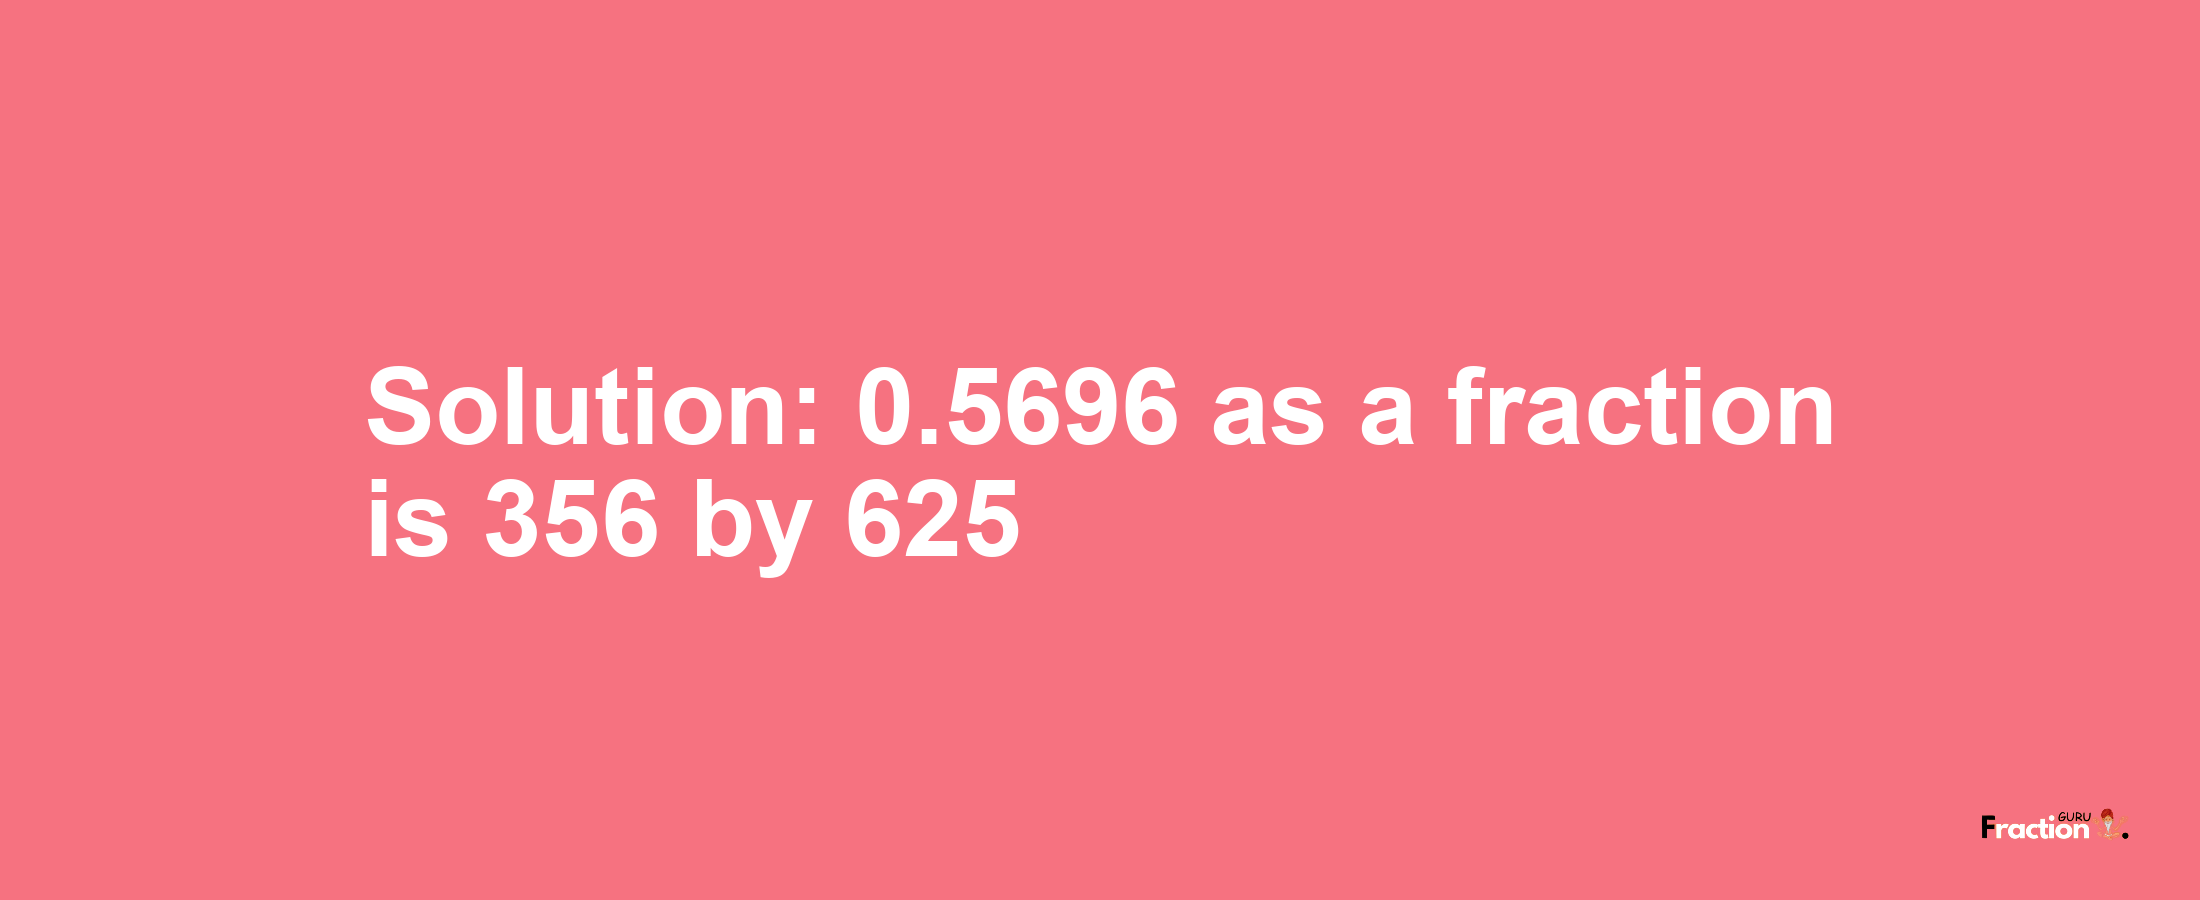 Solution:0.5696 as a fraction is 356/625